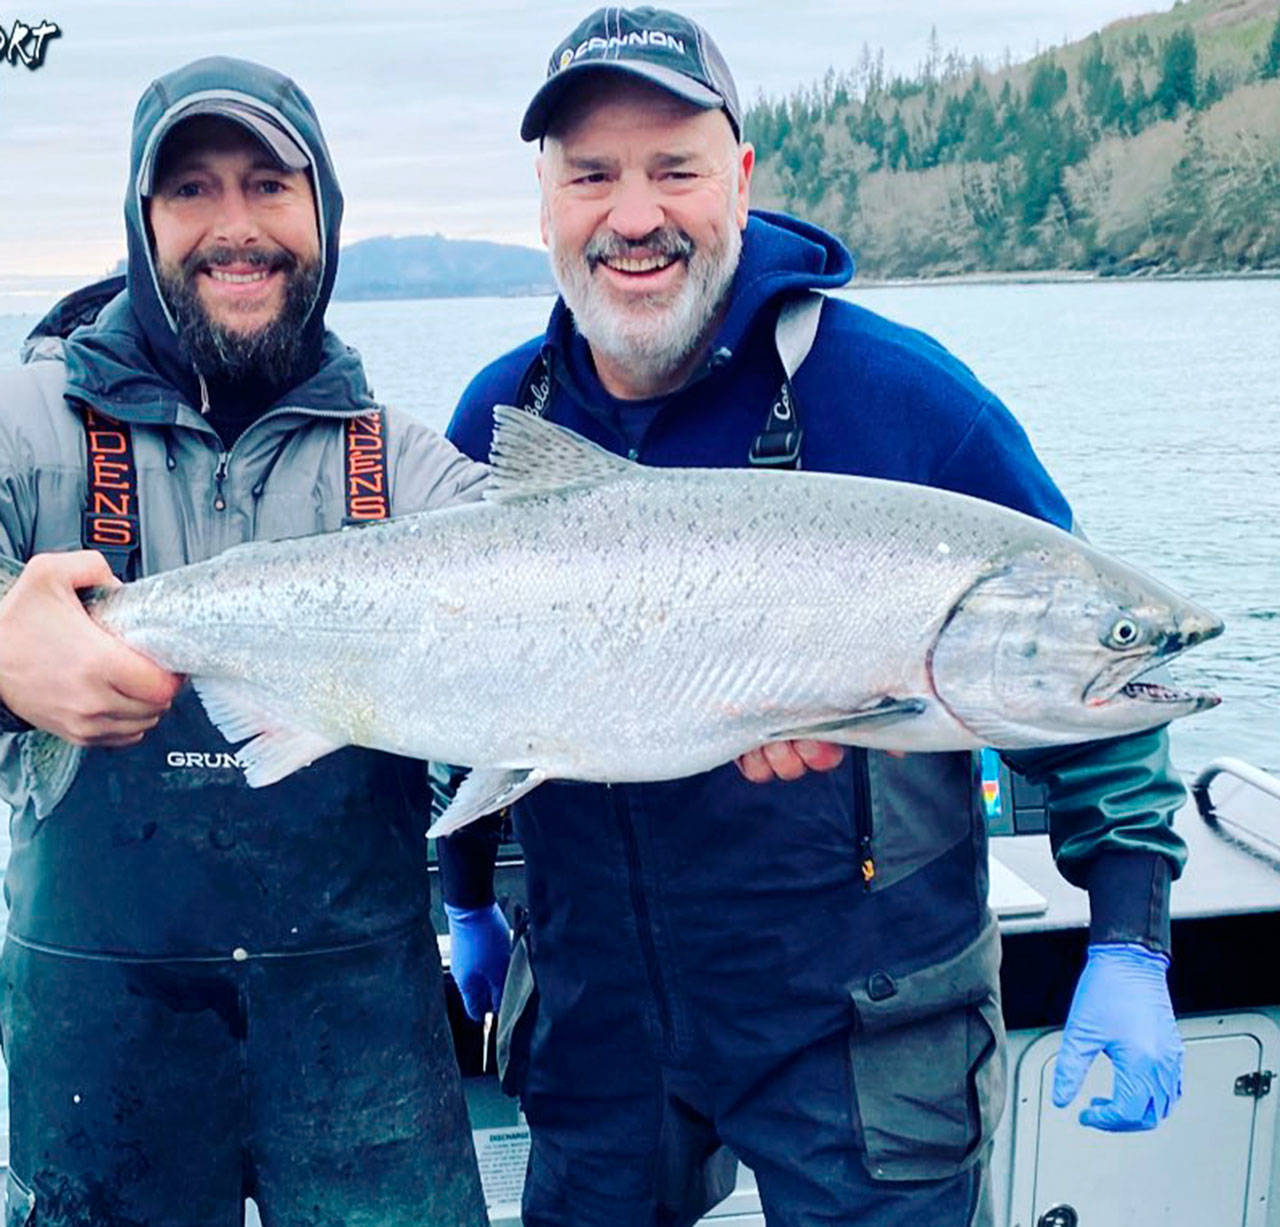 Joey Pyburn, left, and Tom Nelson, the host of 710 AM ESPN Seattle’s The Outdoor Line radio show, display a 17.5-pound blackmouth chinook caught while fishing out of Mason’s Resort in Sekiu. The blackmouth chinook fishery will run through April 30 in Marine Area 5. Neighboring Marine Area 6 (Eastern Strait of Juan de Fuca) and 9 (Admiralty Inlet) will not open for blackmouth fisheries this year. (Mason’s Resort)